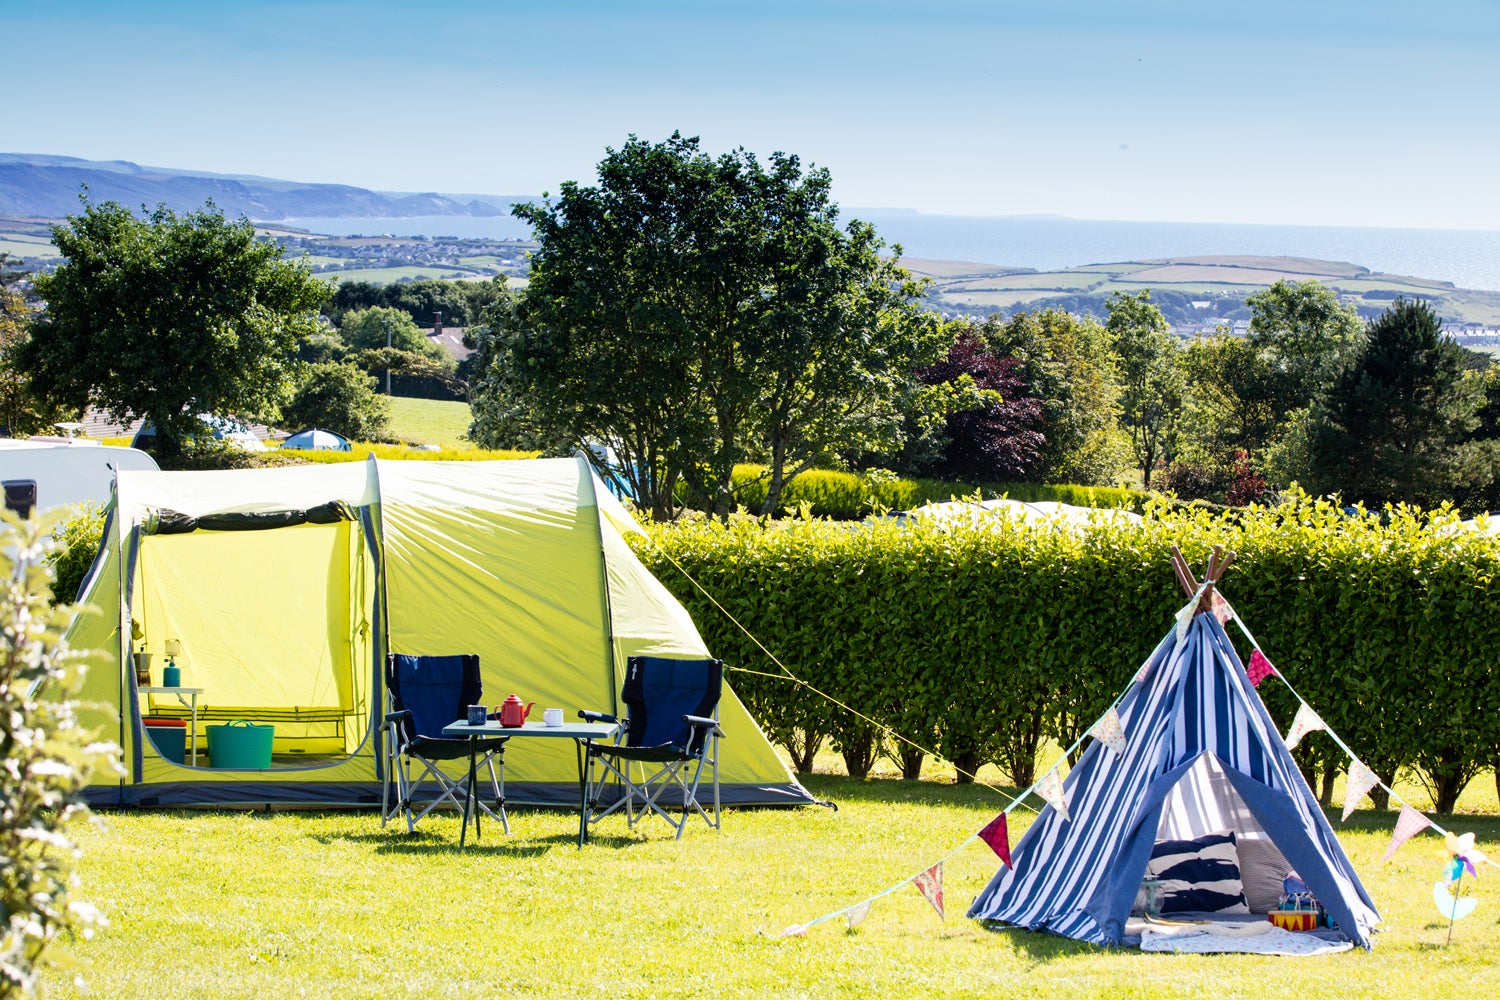 The UK is home to hundreds of campsites with breathtaking views